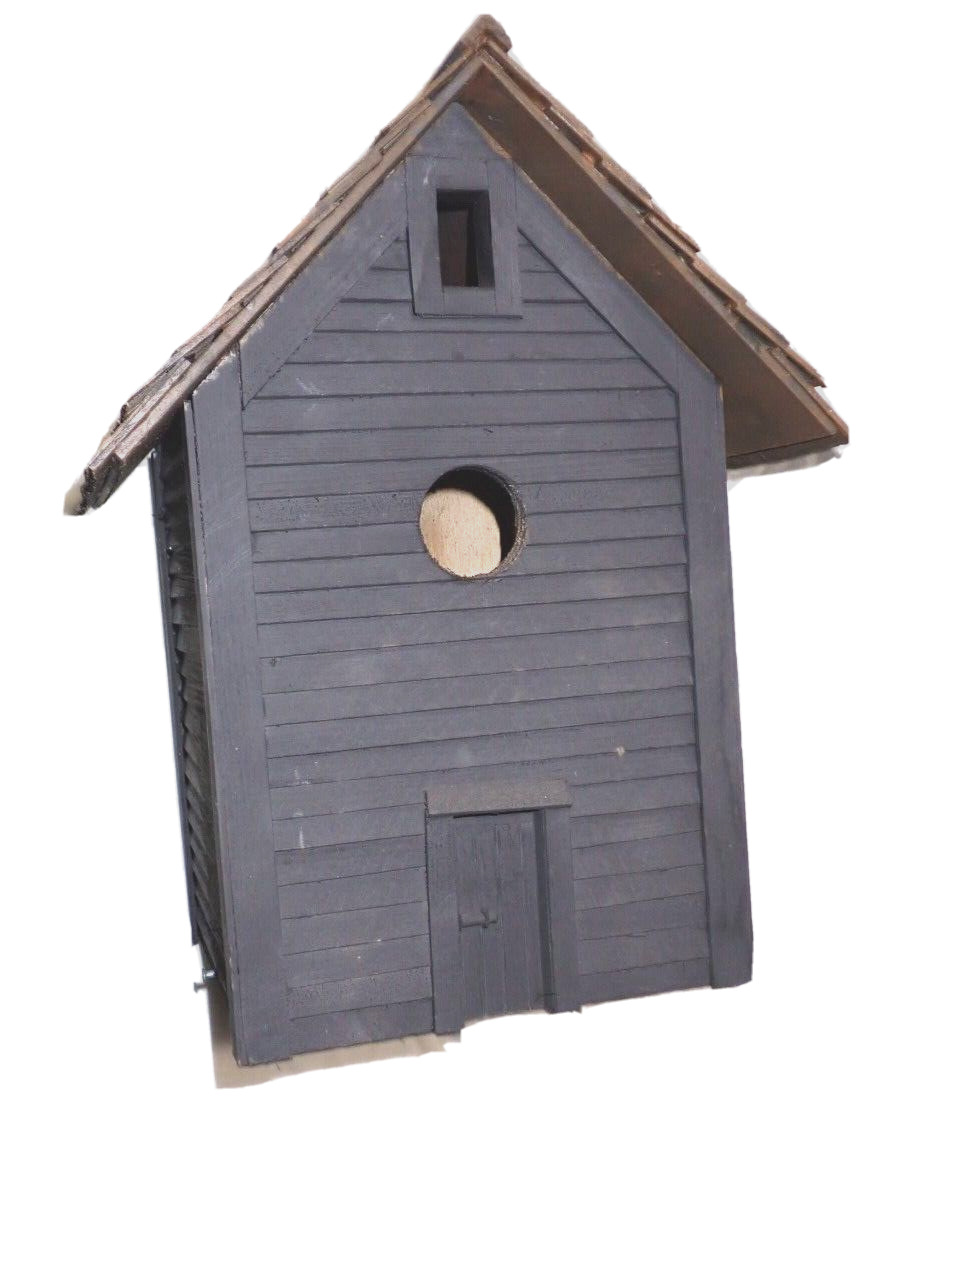 Old Tobacco Barn Artistic Bird House One of a Kind Collectable or For the Birds